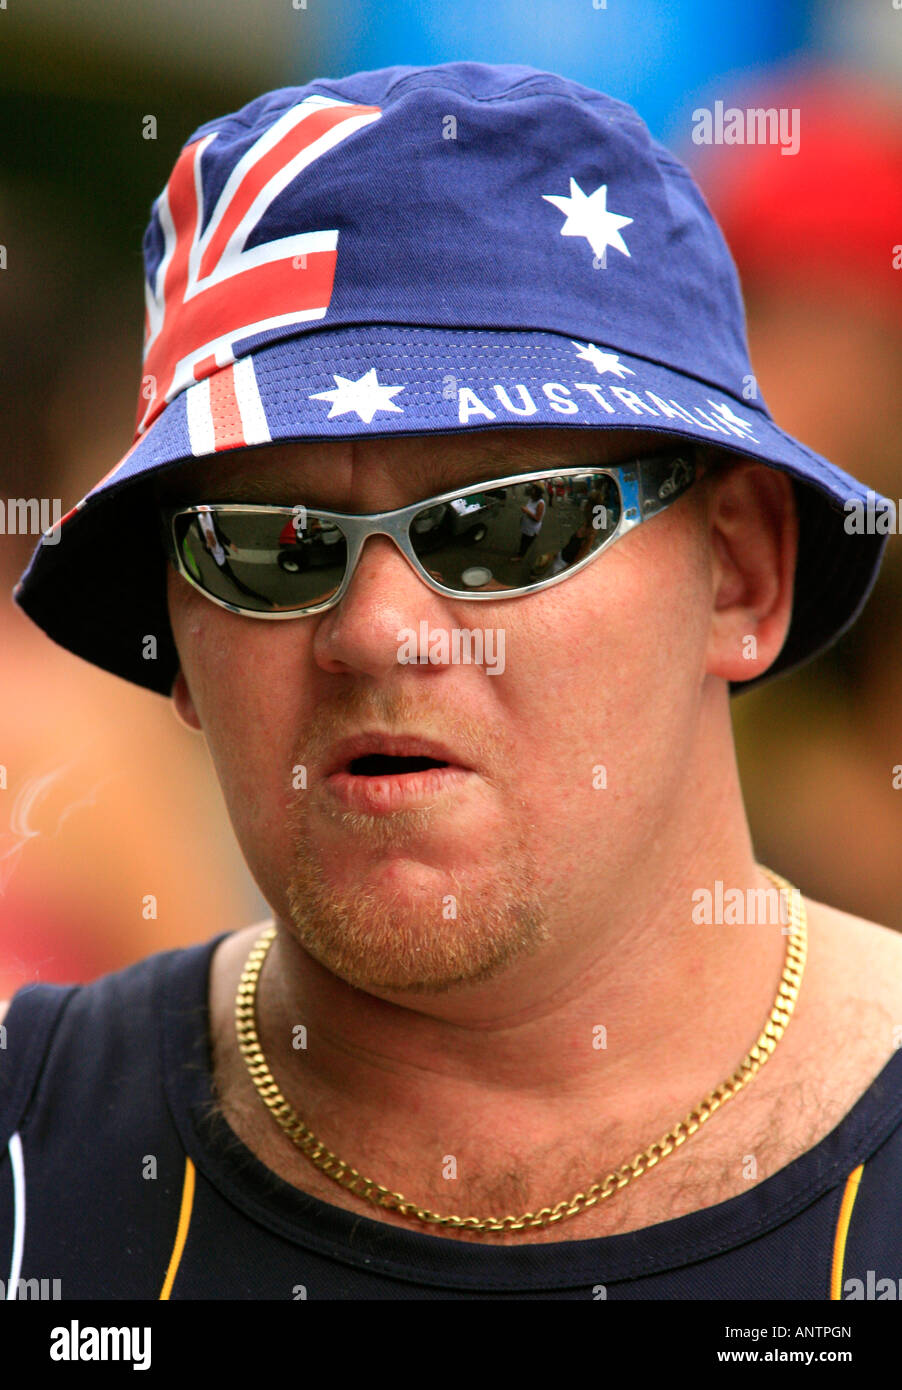 An Aussie male with nationalistic Flag sun hat and sun glasses Stock Photo